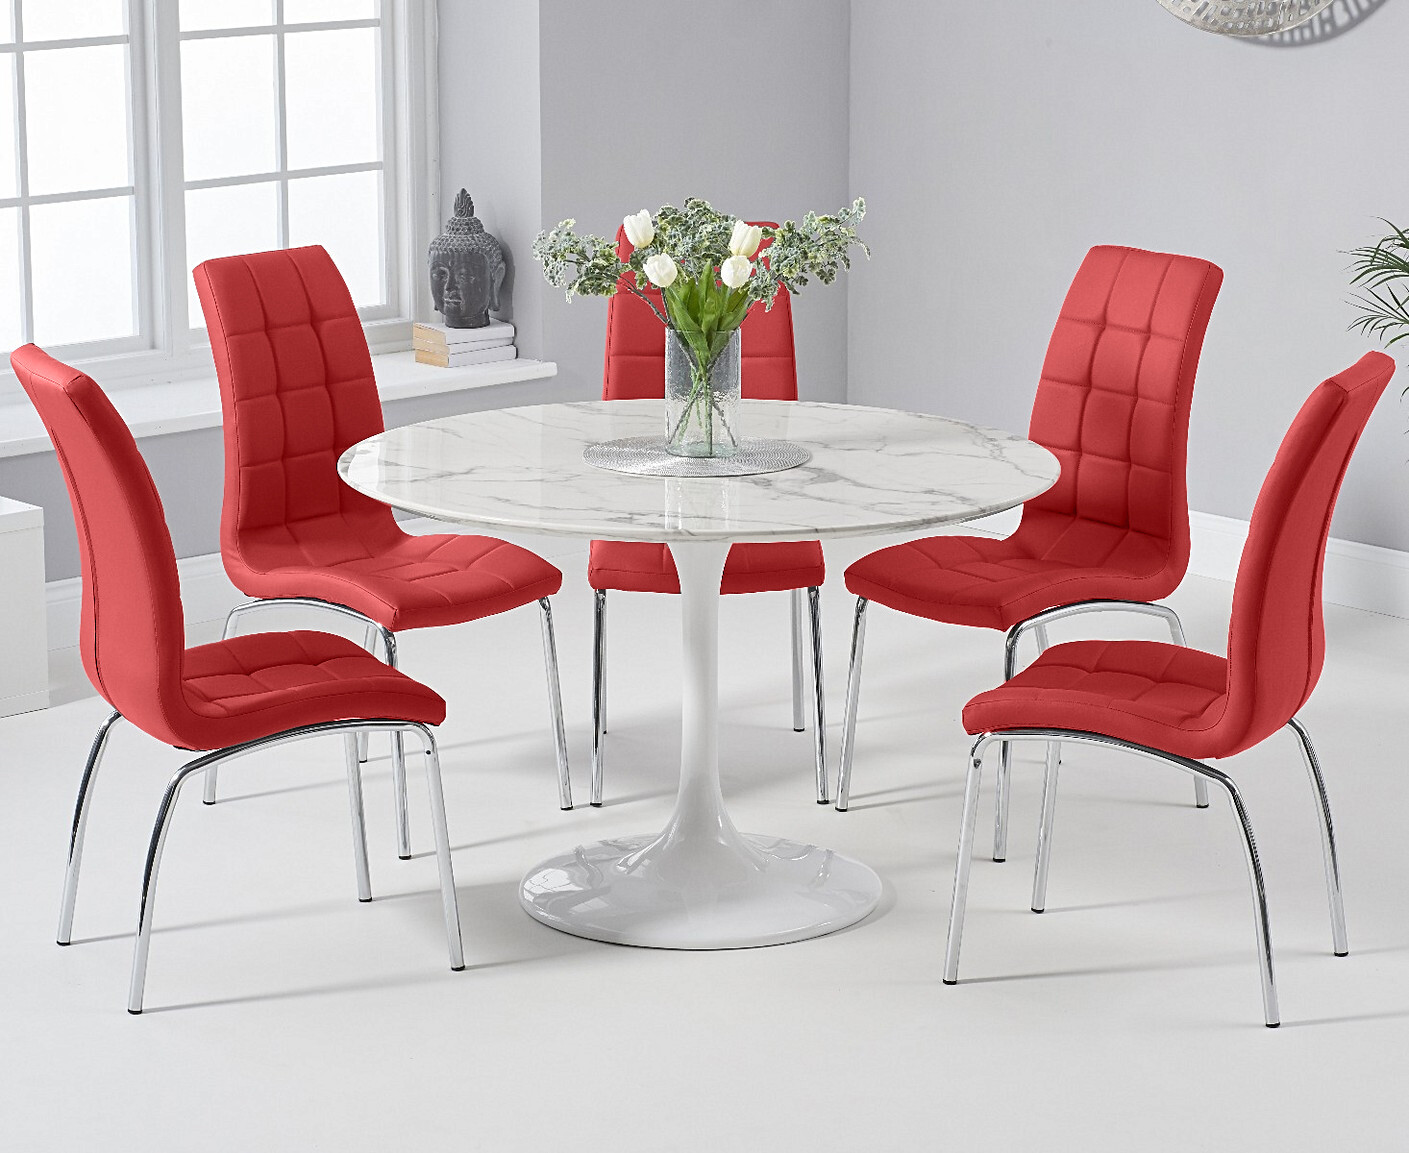 Brighton 120cm Round Marble White Dining Table With 4 Black Enzo Chairs